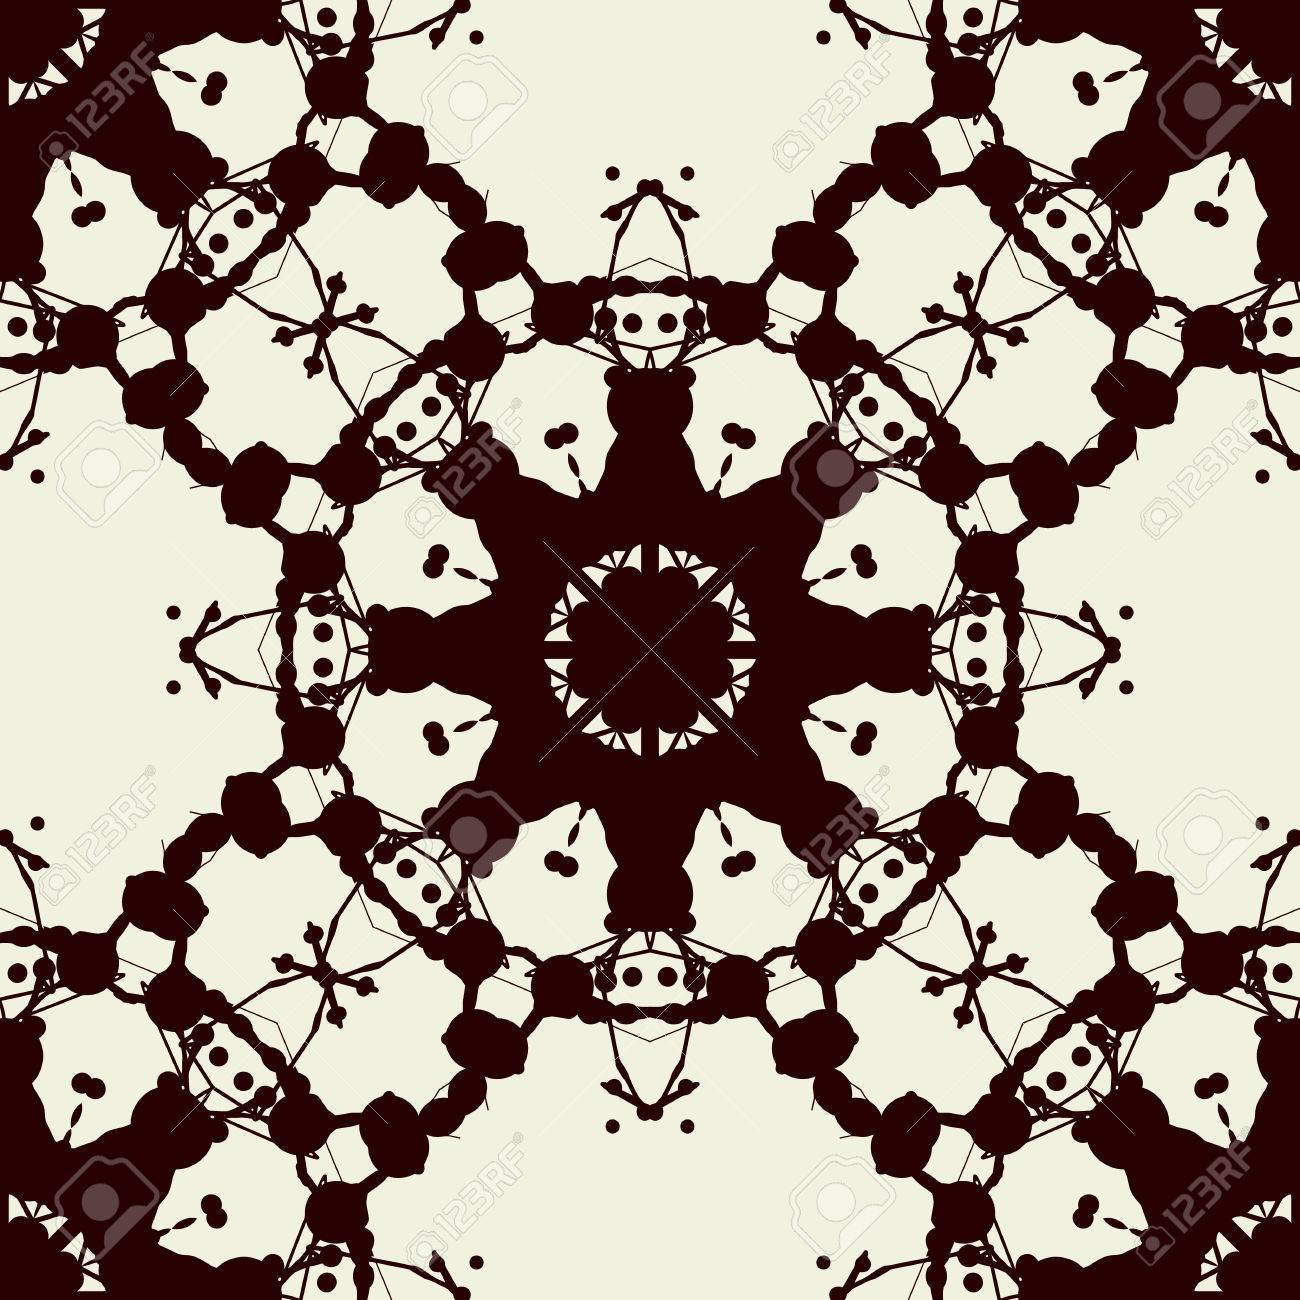 Seamless Print Based On Rorschach Inkblot Test Abstract